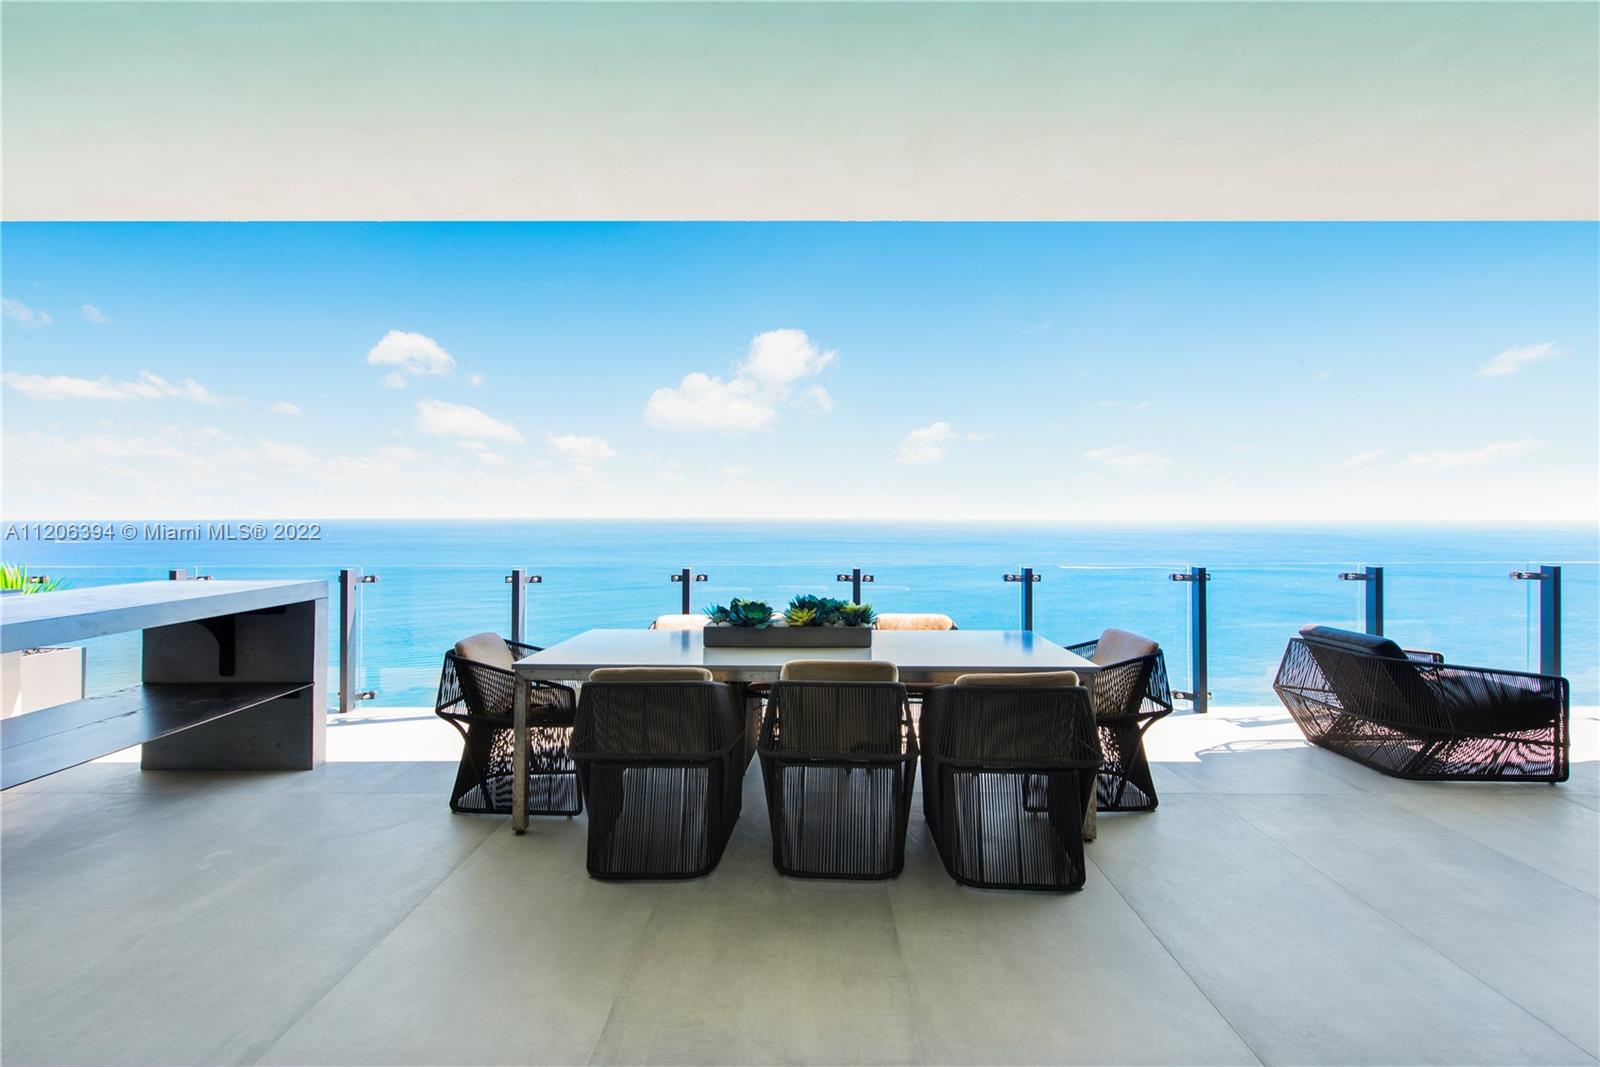 MUSE SUNNY ISLES RESIDENCE TURNKEY Custom Designed & artfully crafted this 60' foot wide, full floor